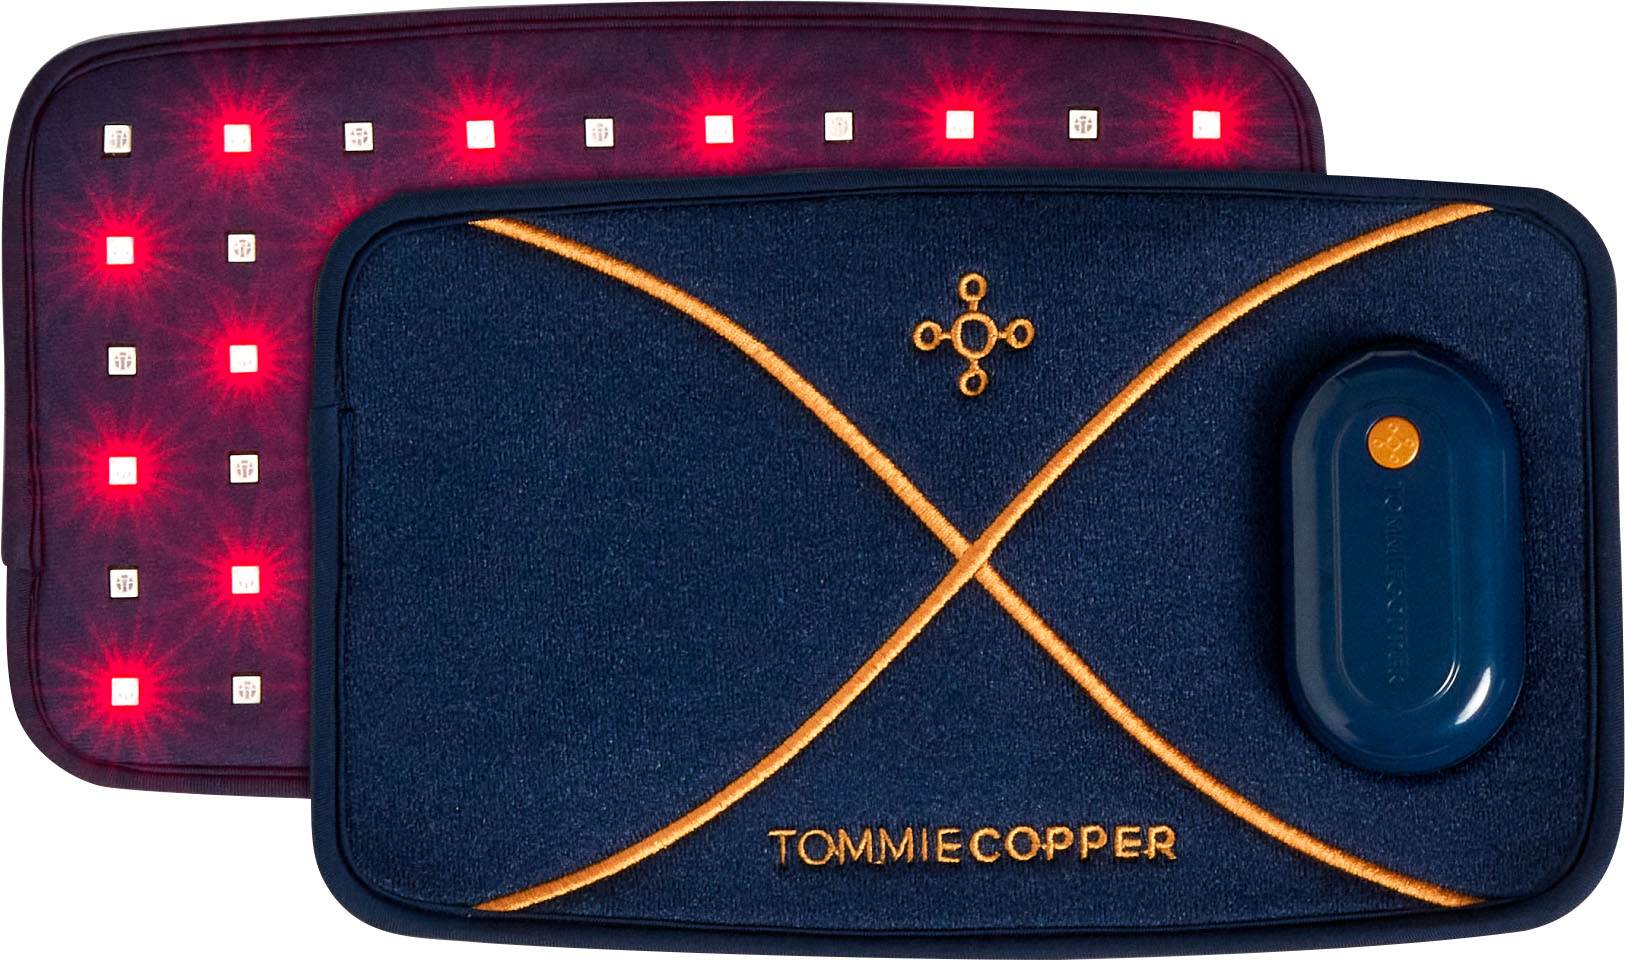 Tommie Copper Navy Blue 24 Lower Back Support Compression